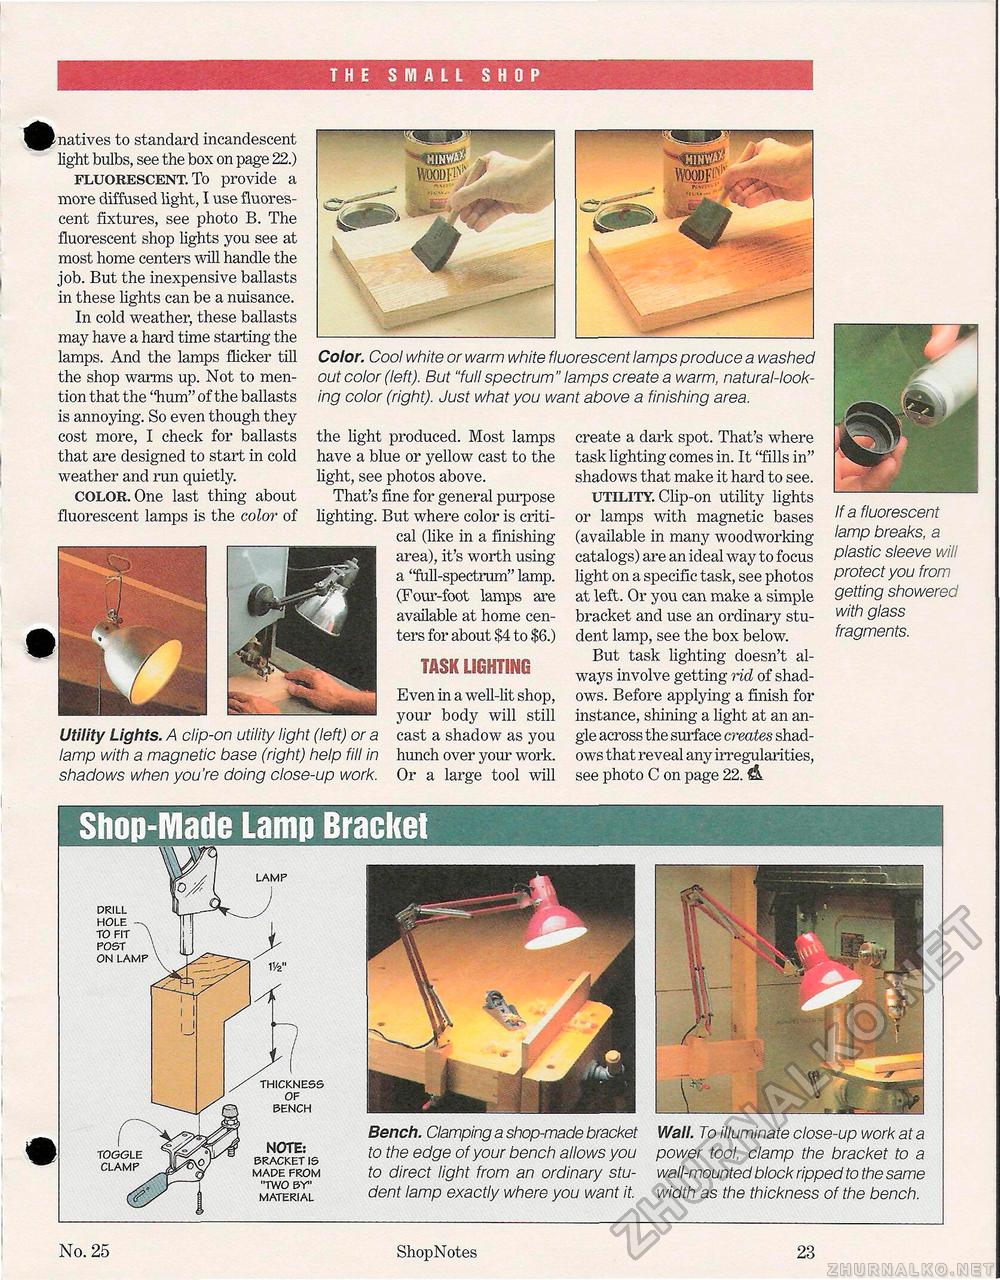 25 - Special Table Saw Issue,  23